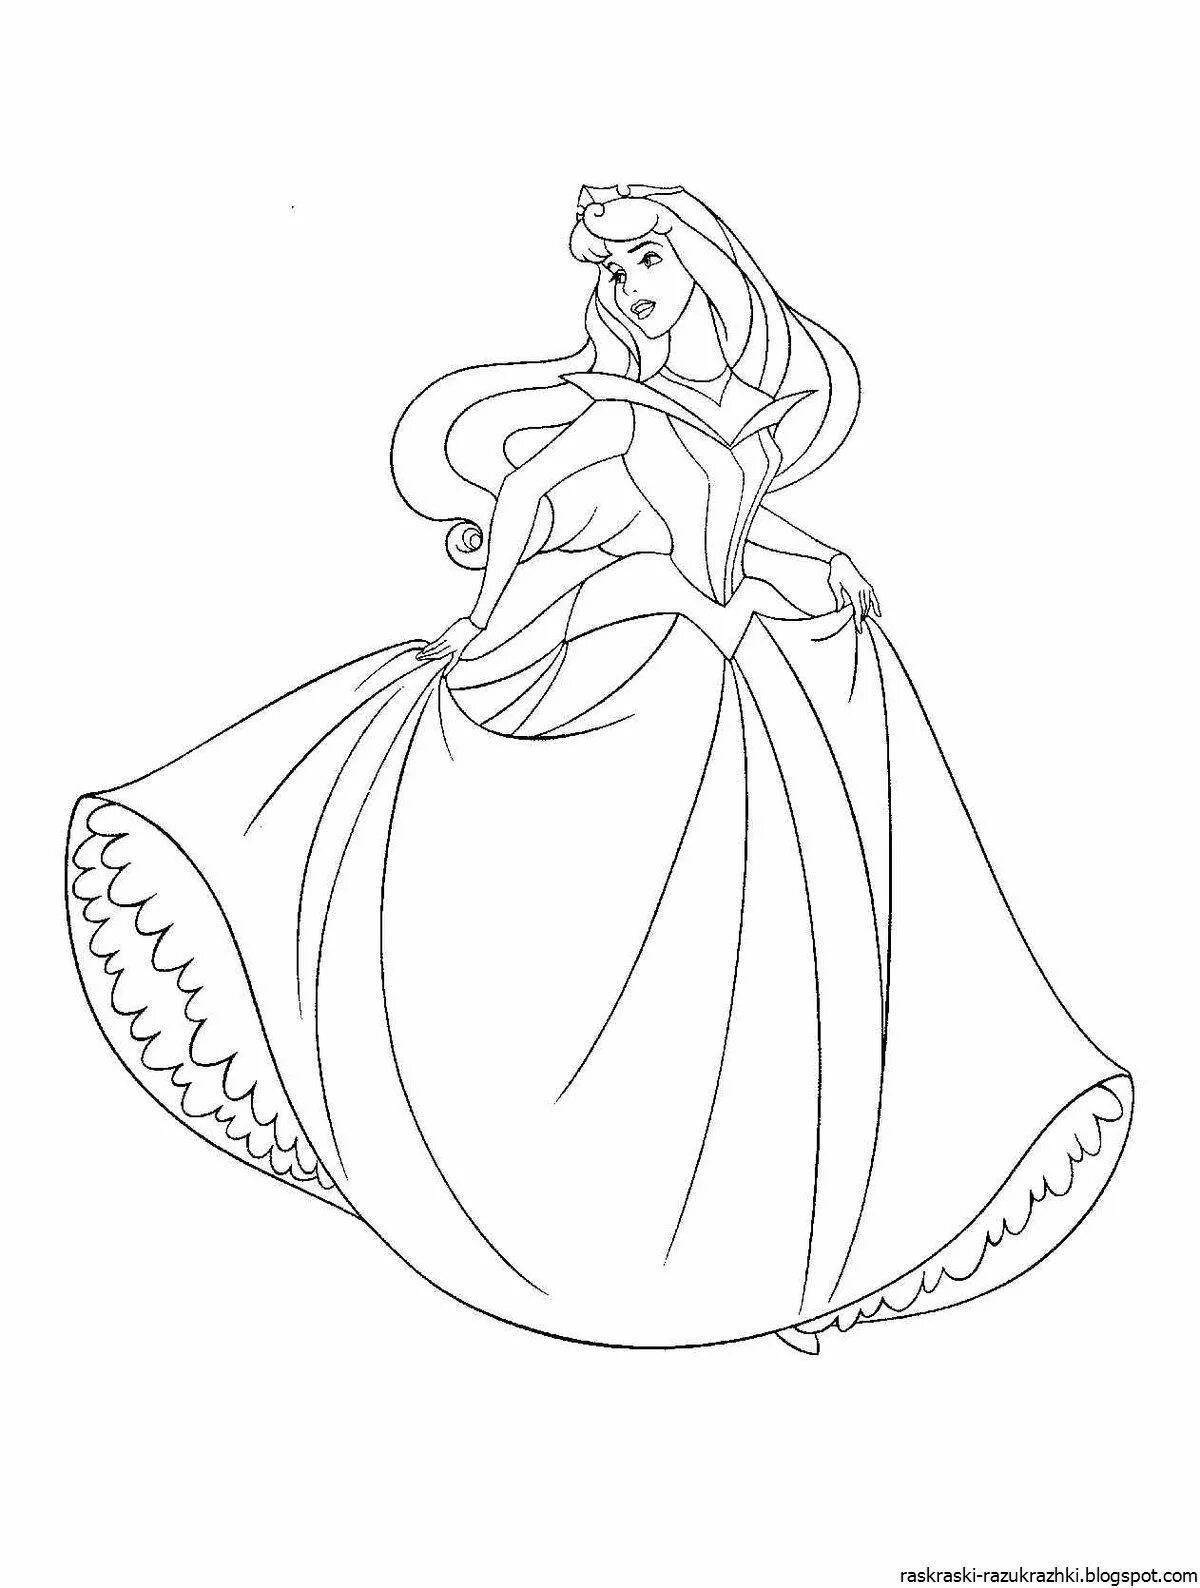 Amazing princess coloring pages for girls 4-5 years old